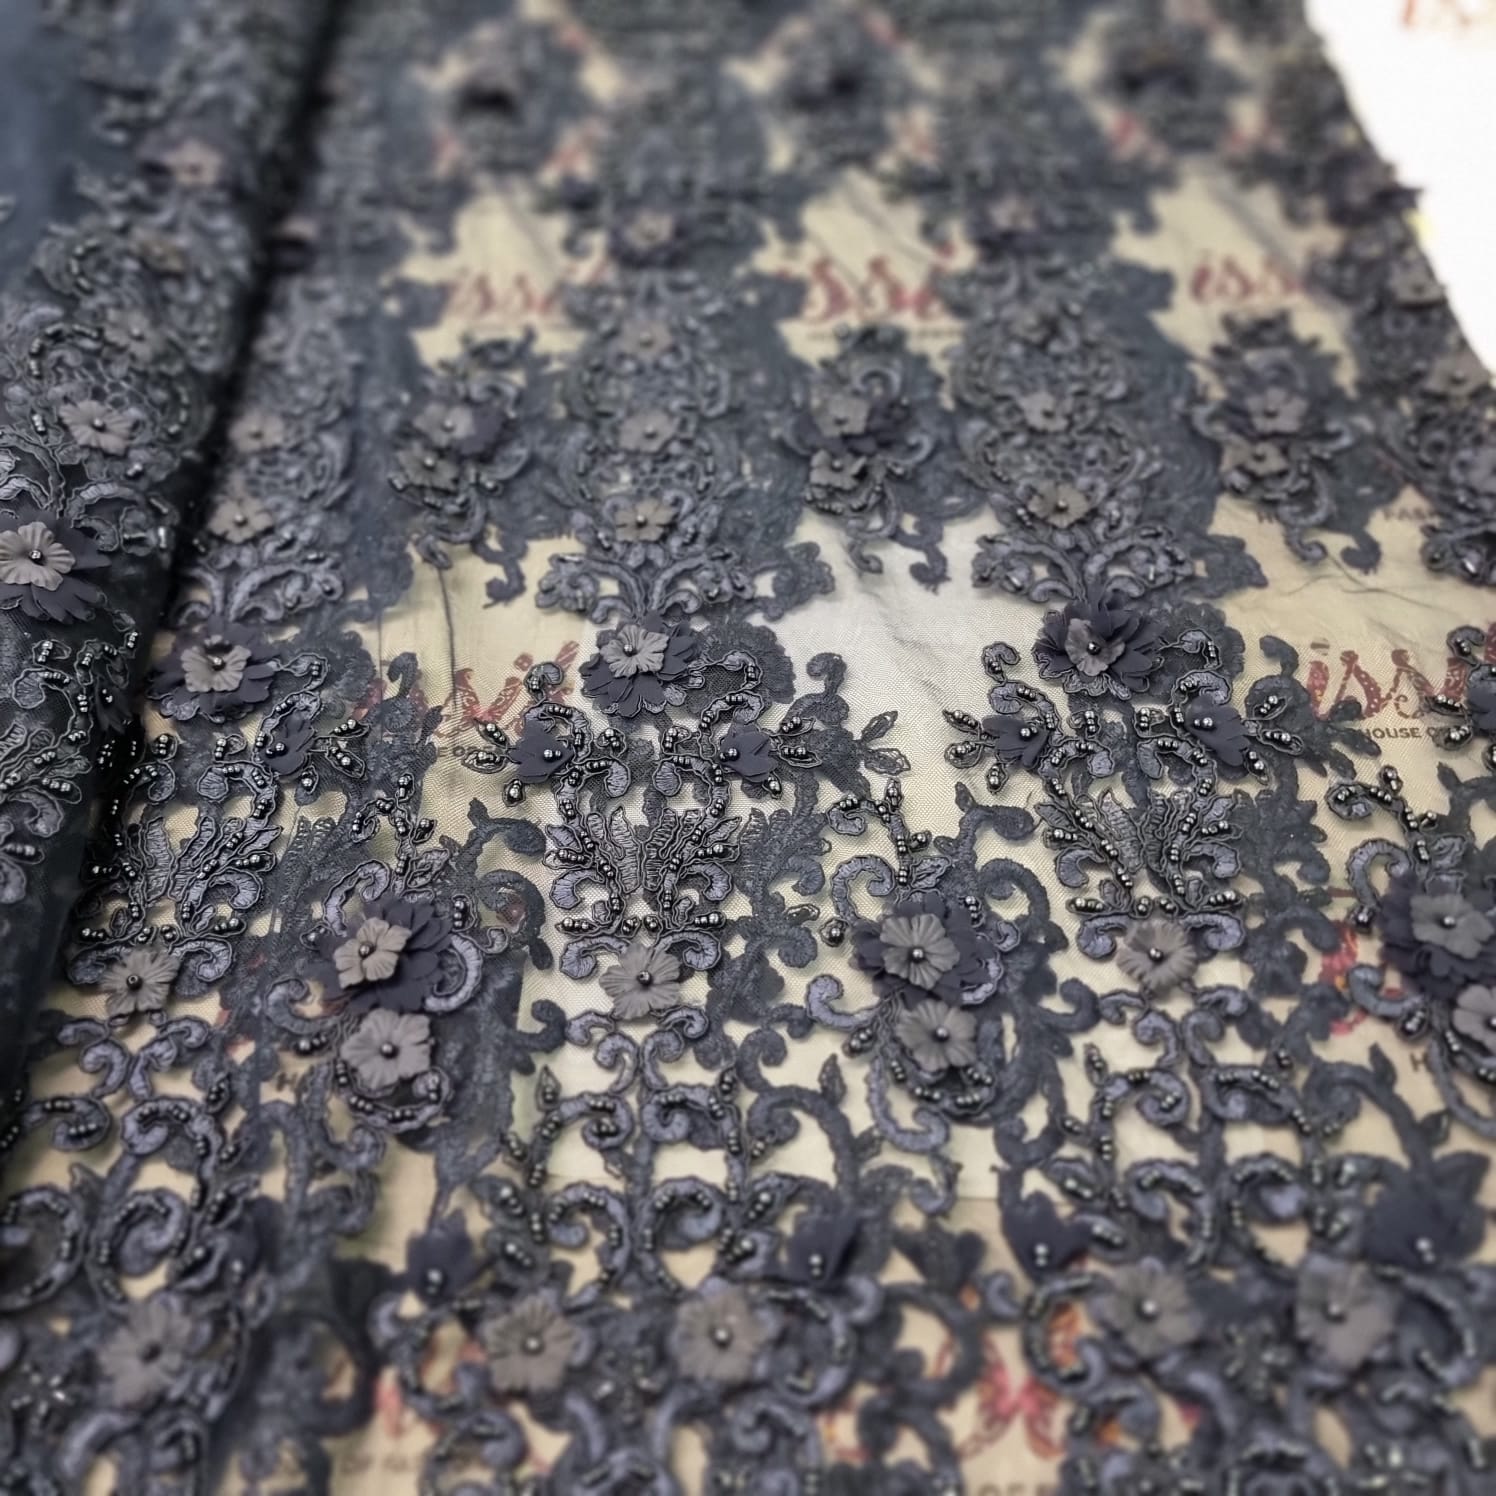 Navy Blue Floral Beaded Lace Fabric - House of Prints